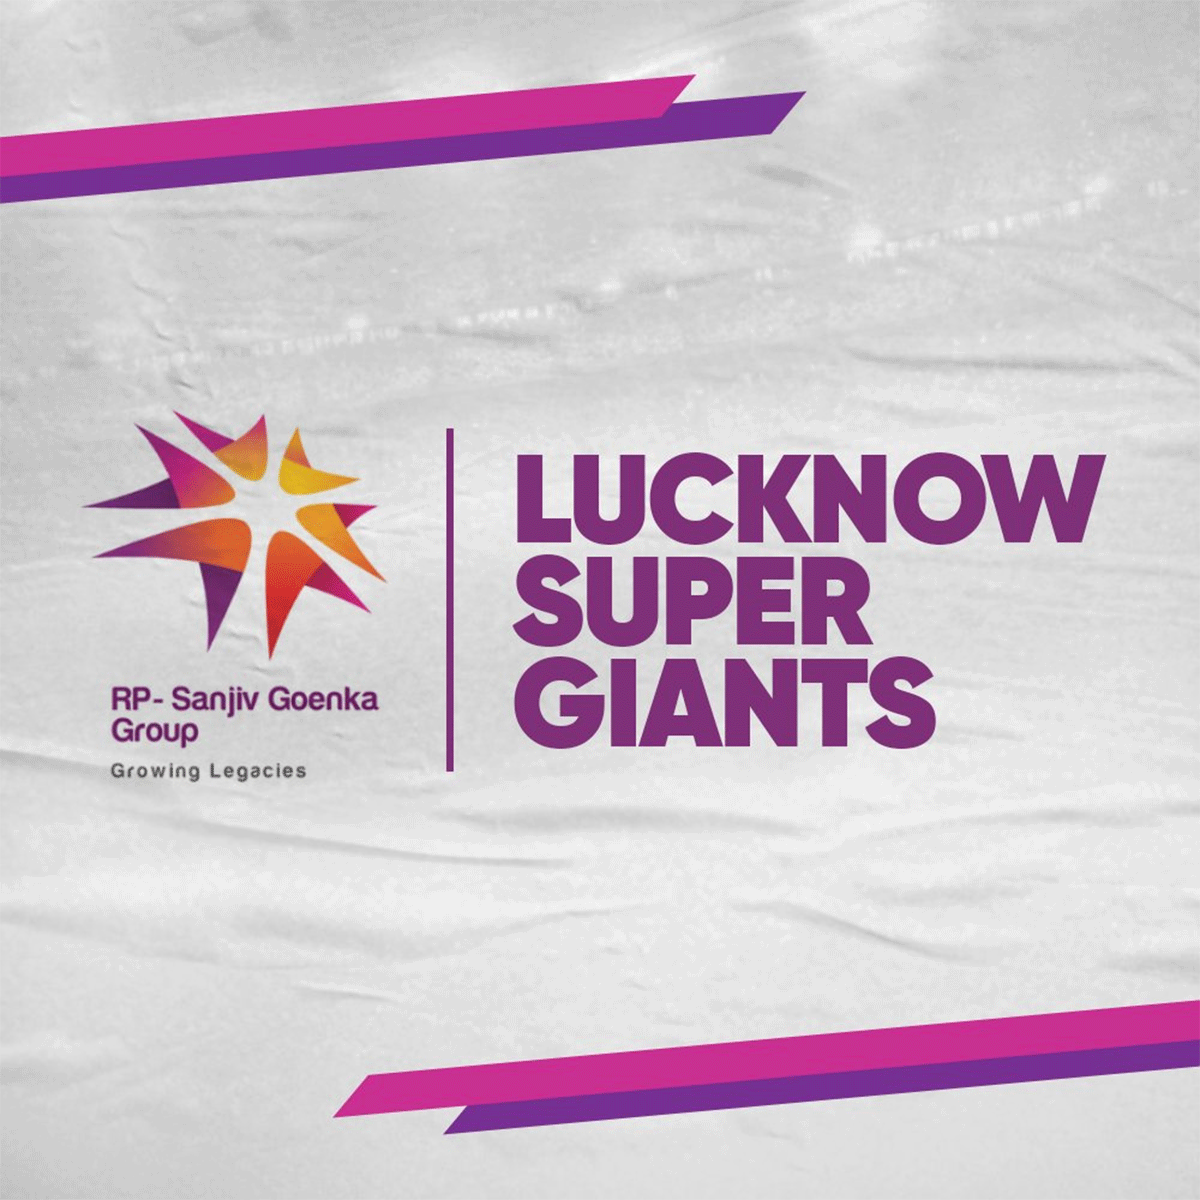 The new Lucknow franchise is called Lucknow Super Giants